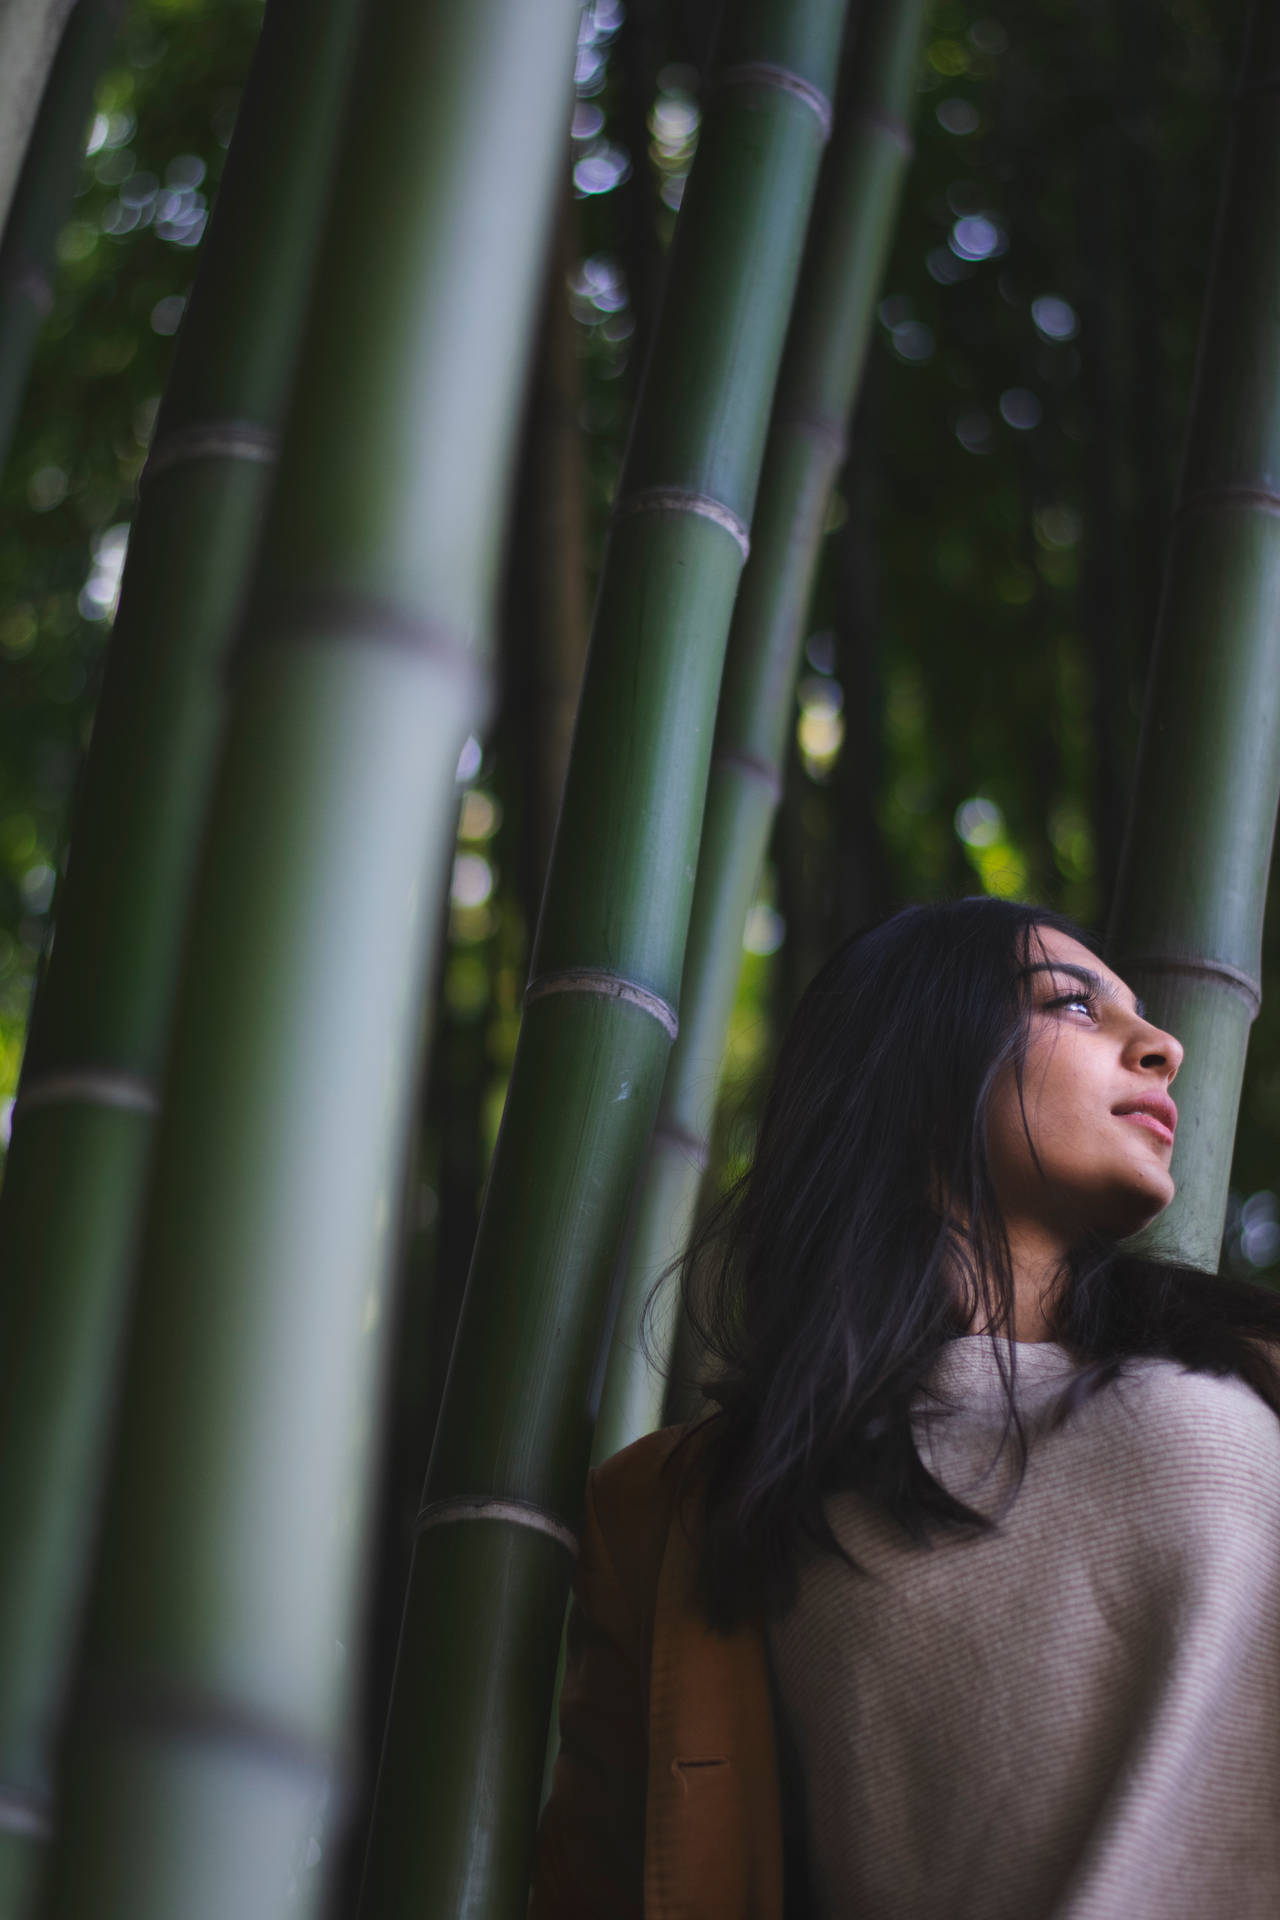 Woman By The Bamboo Pole